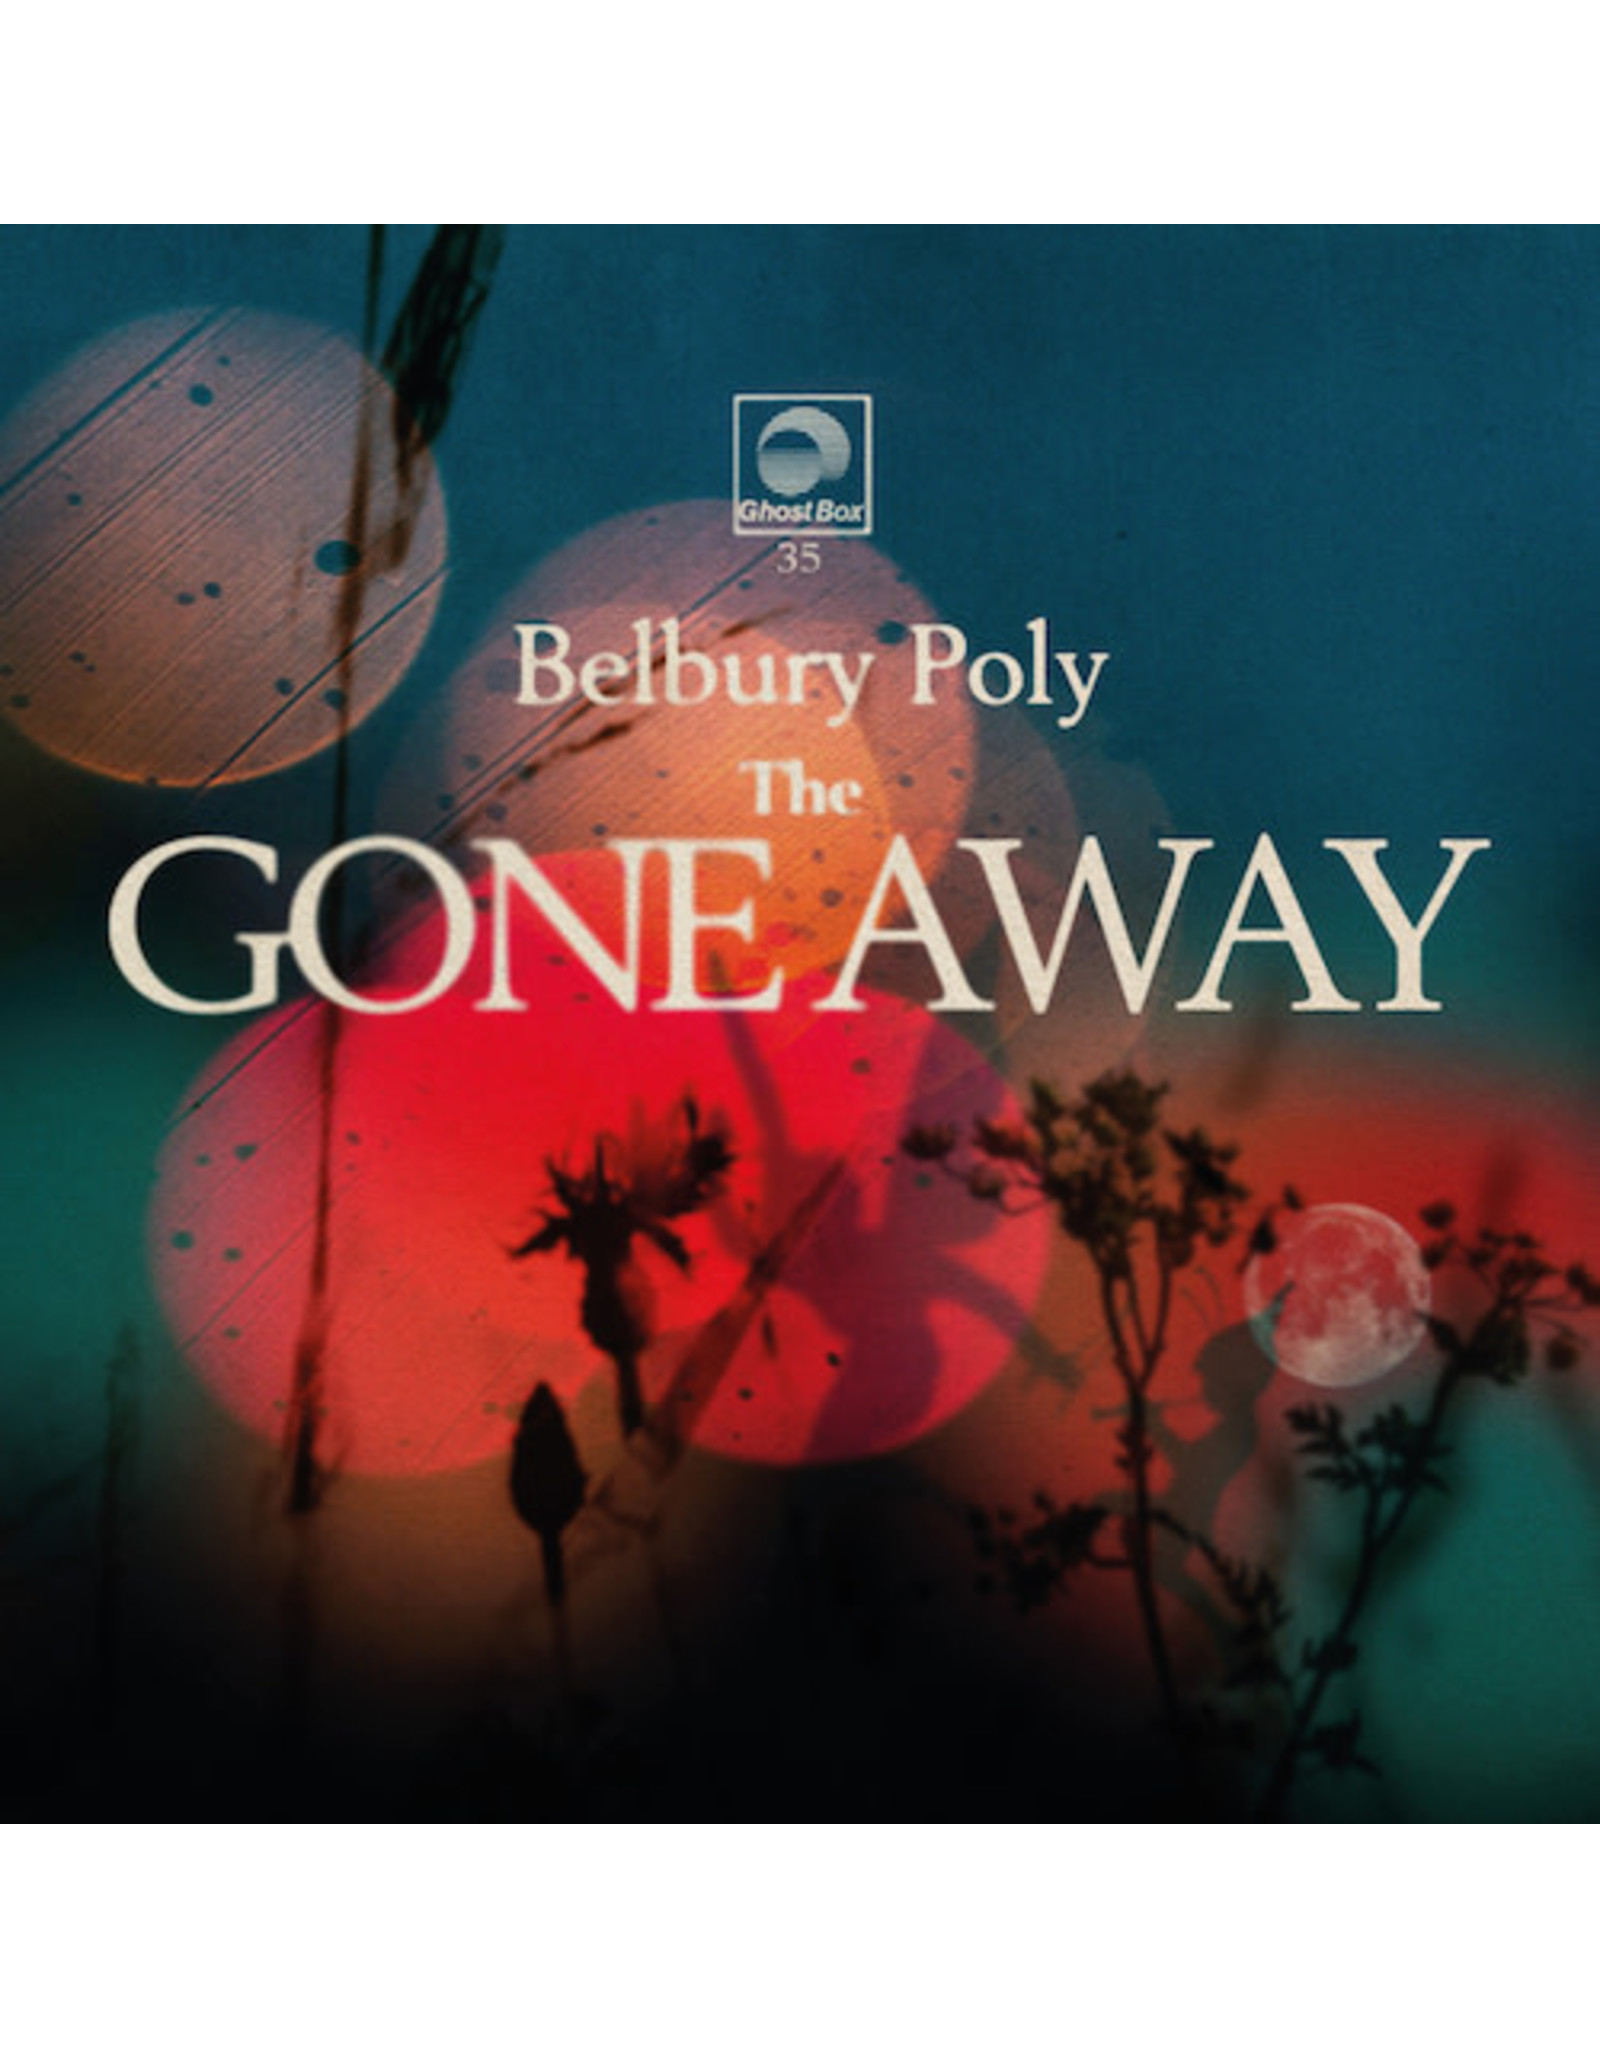 Ghost Box Belbury Poly: The Gone Away LP